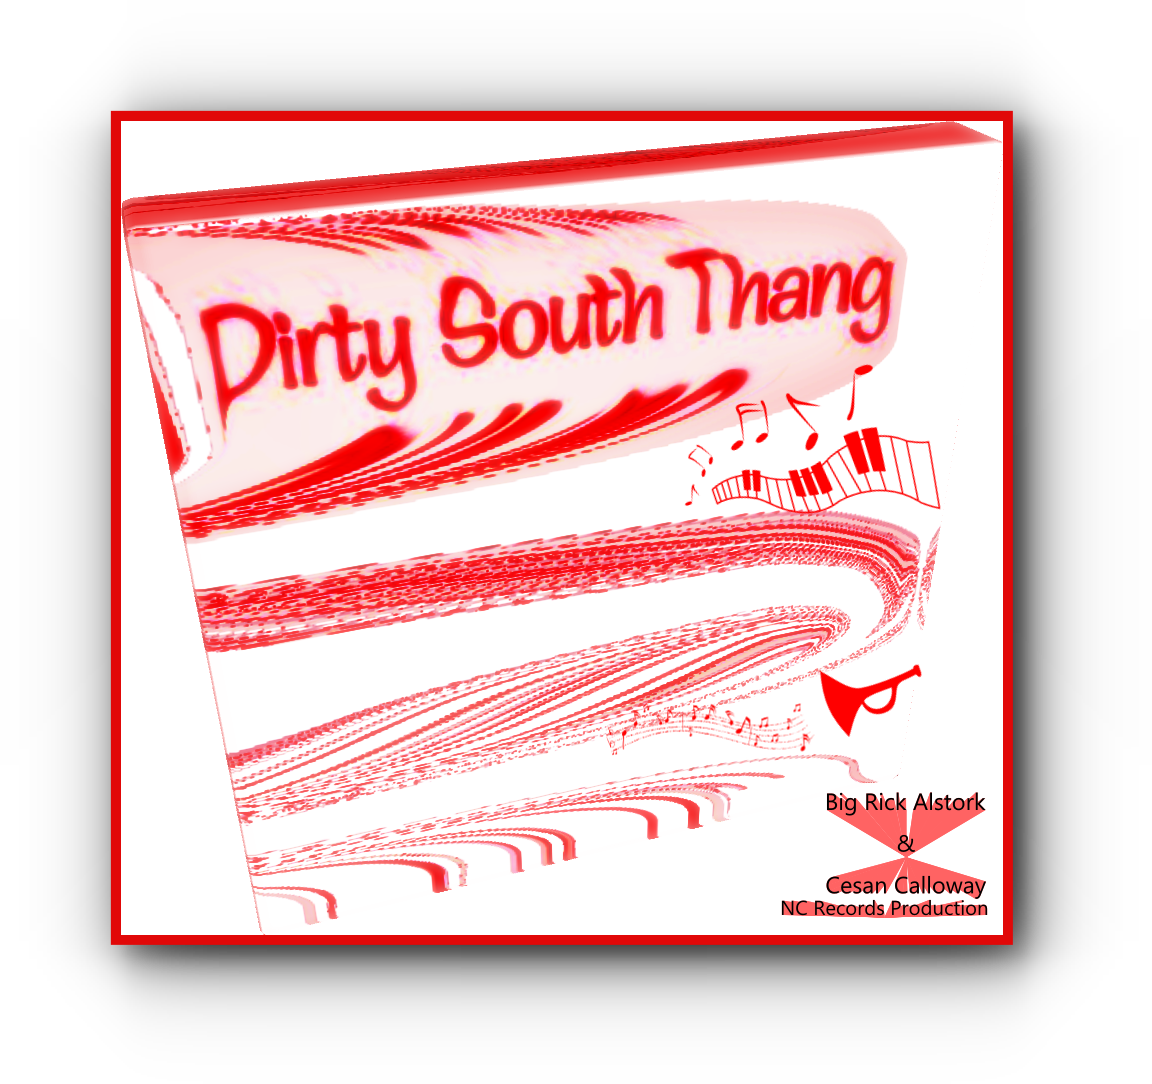 Dirty South thang Cover